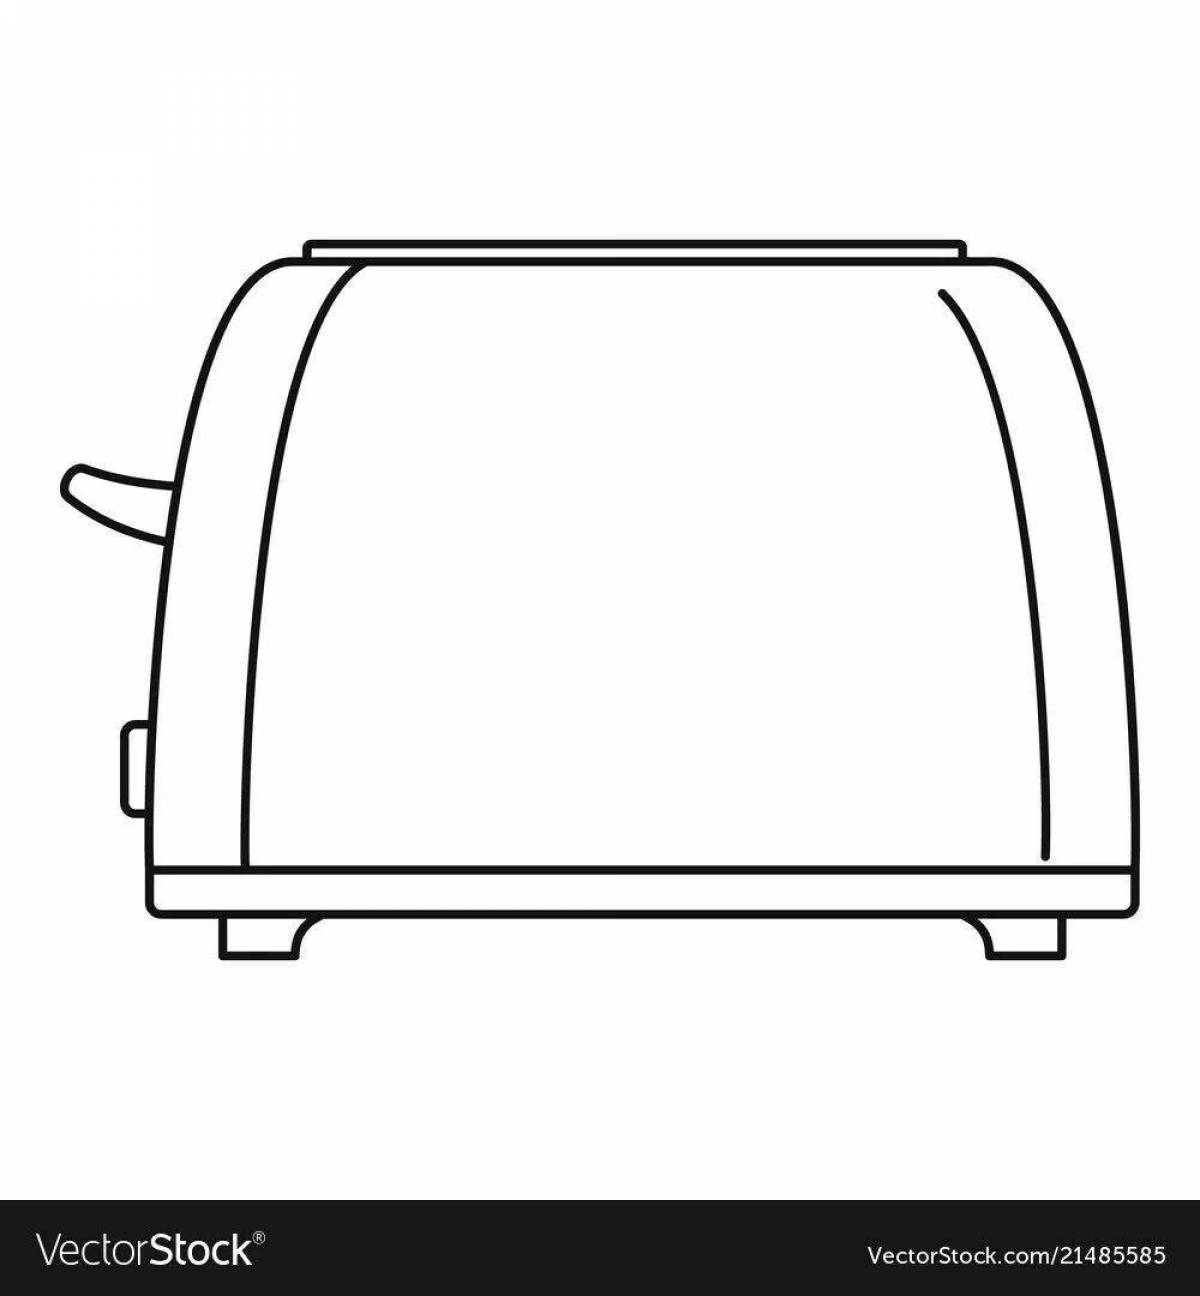 Fat toaster coloring page